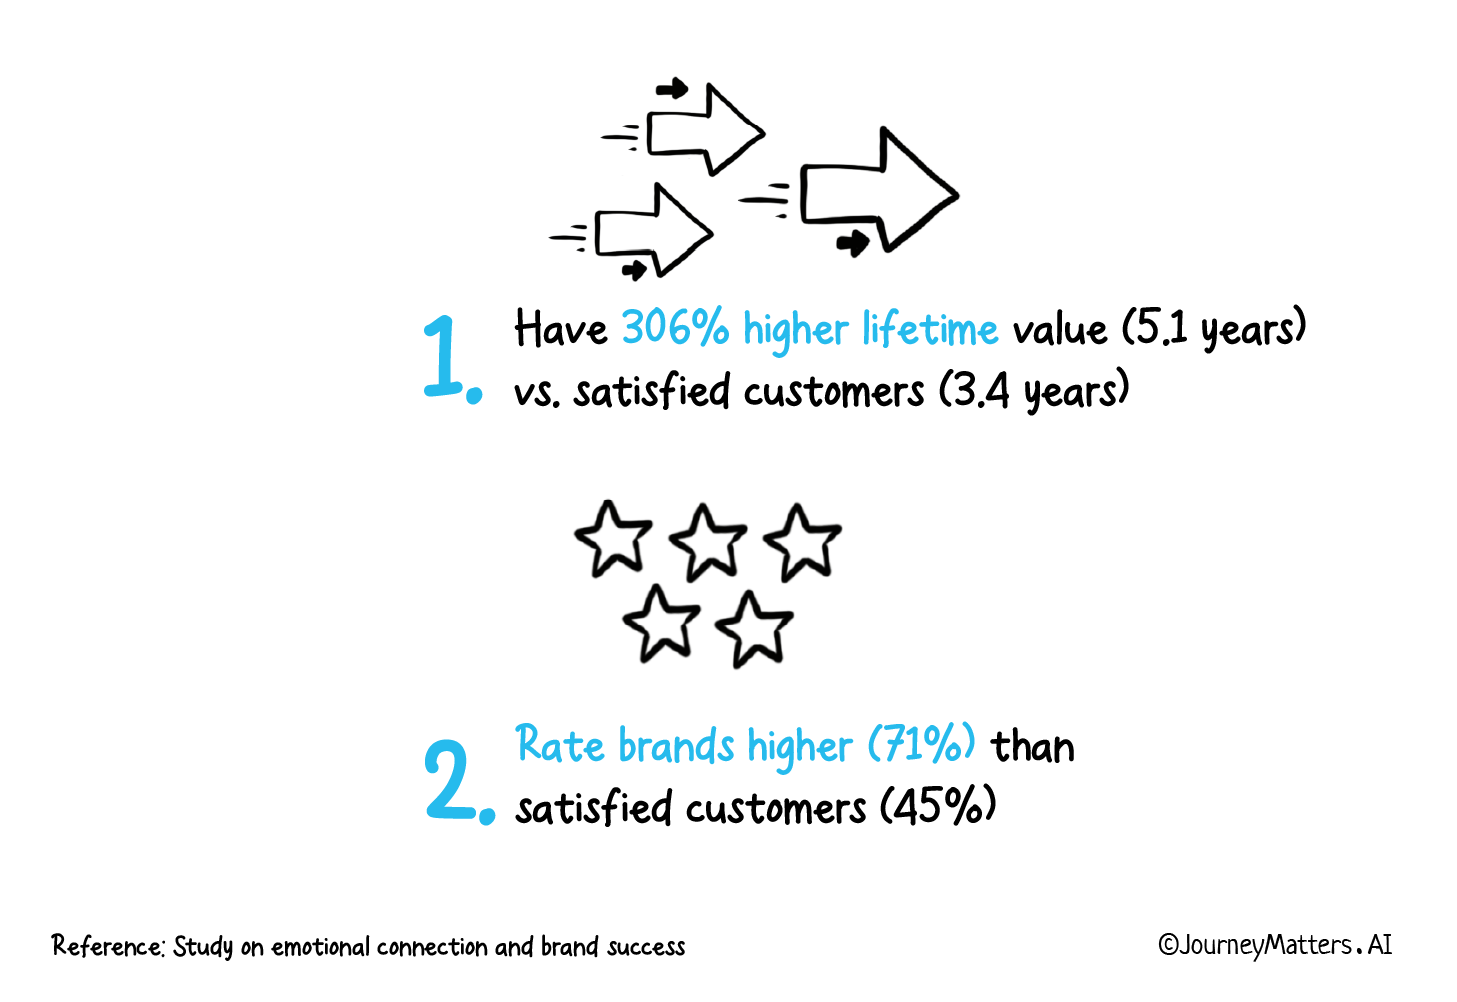 Emotionally connected customers have 306% higher lifetime value and rate brands higher compared to satisfied customers.